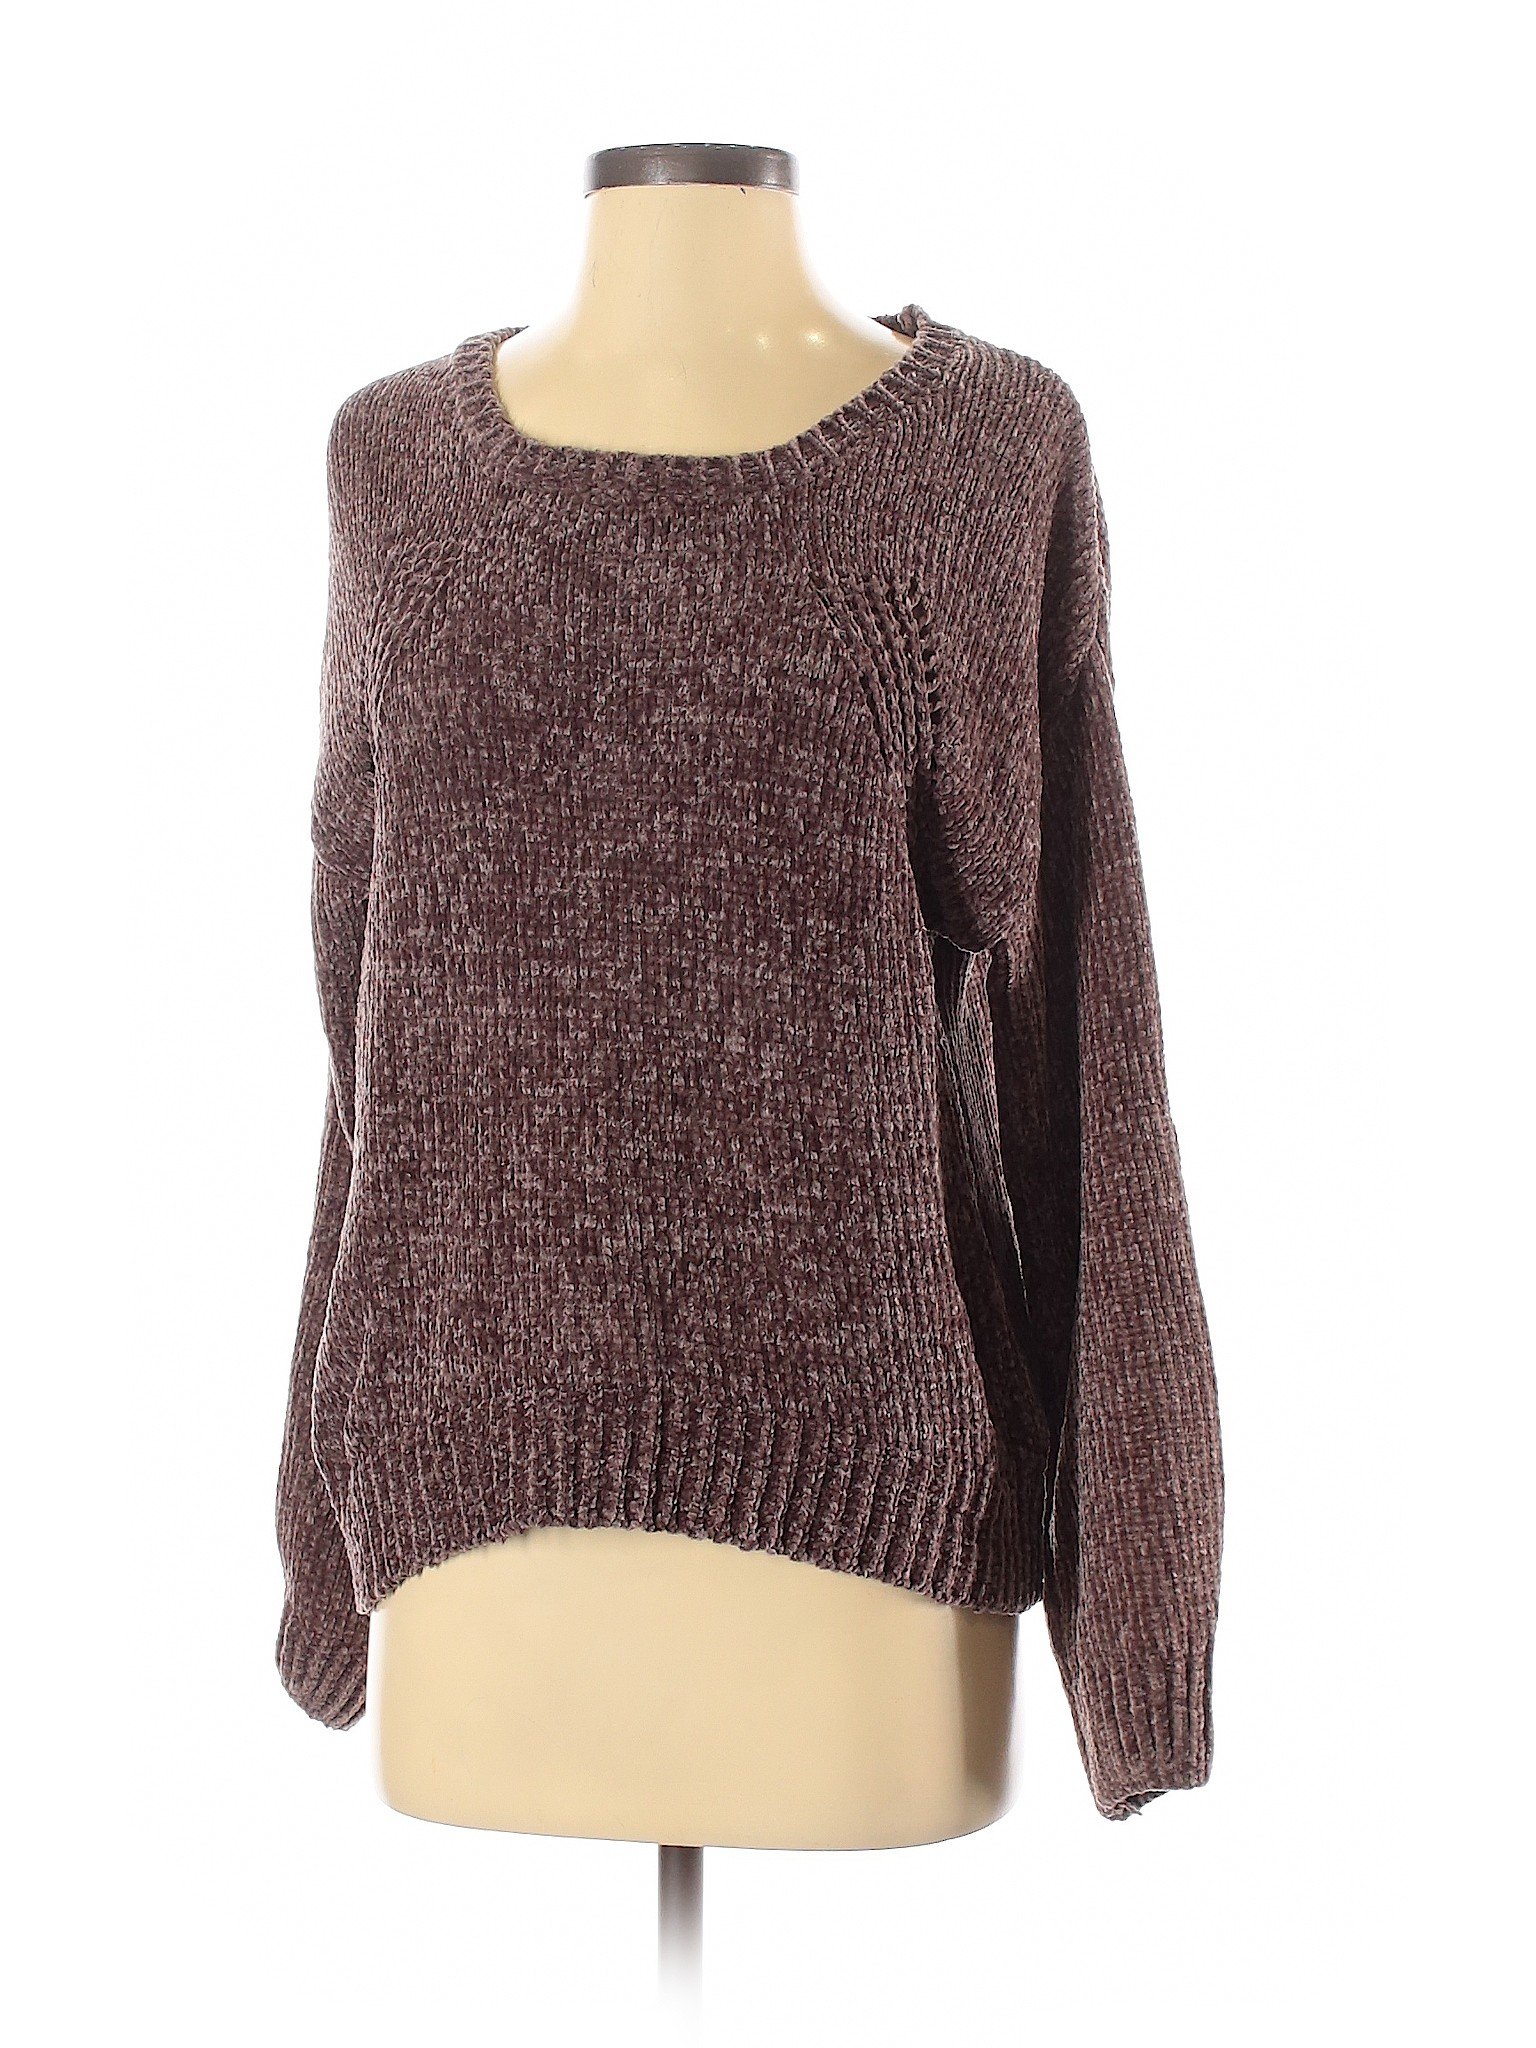 Charlotte Russe Women Brown Pullover Sweater S | eBay